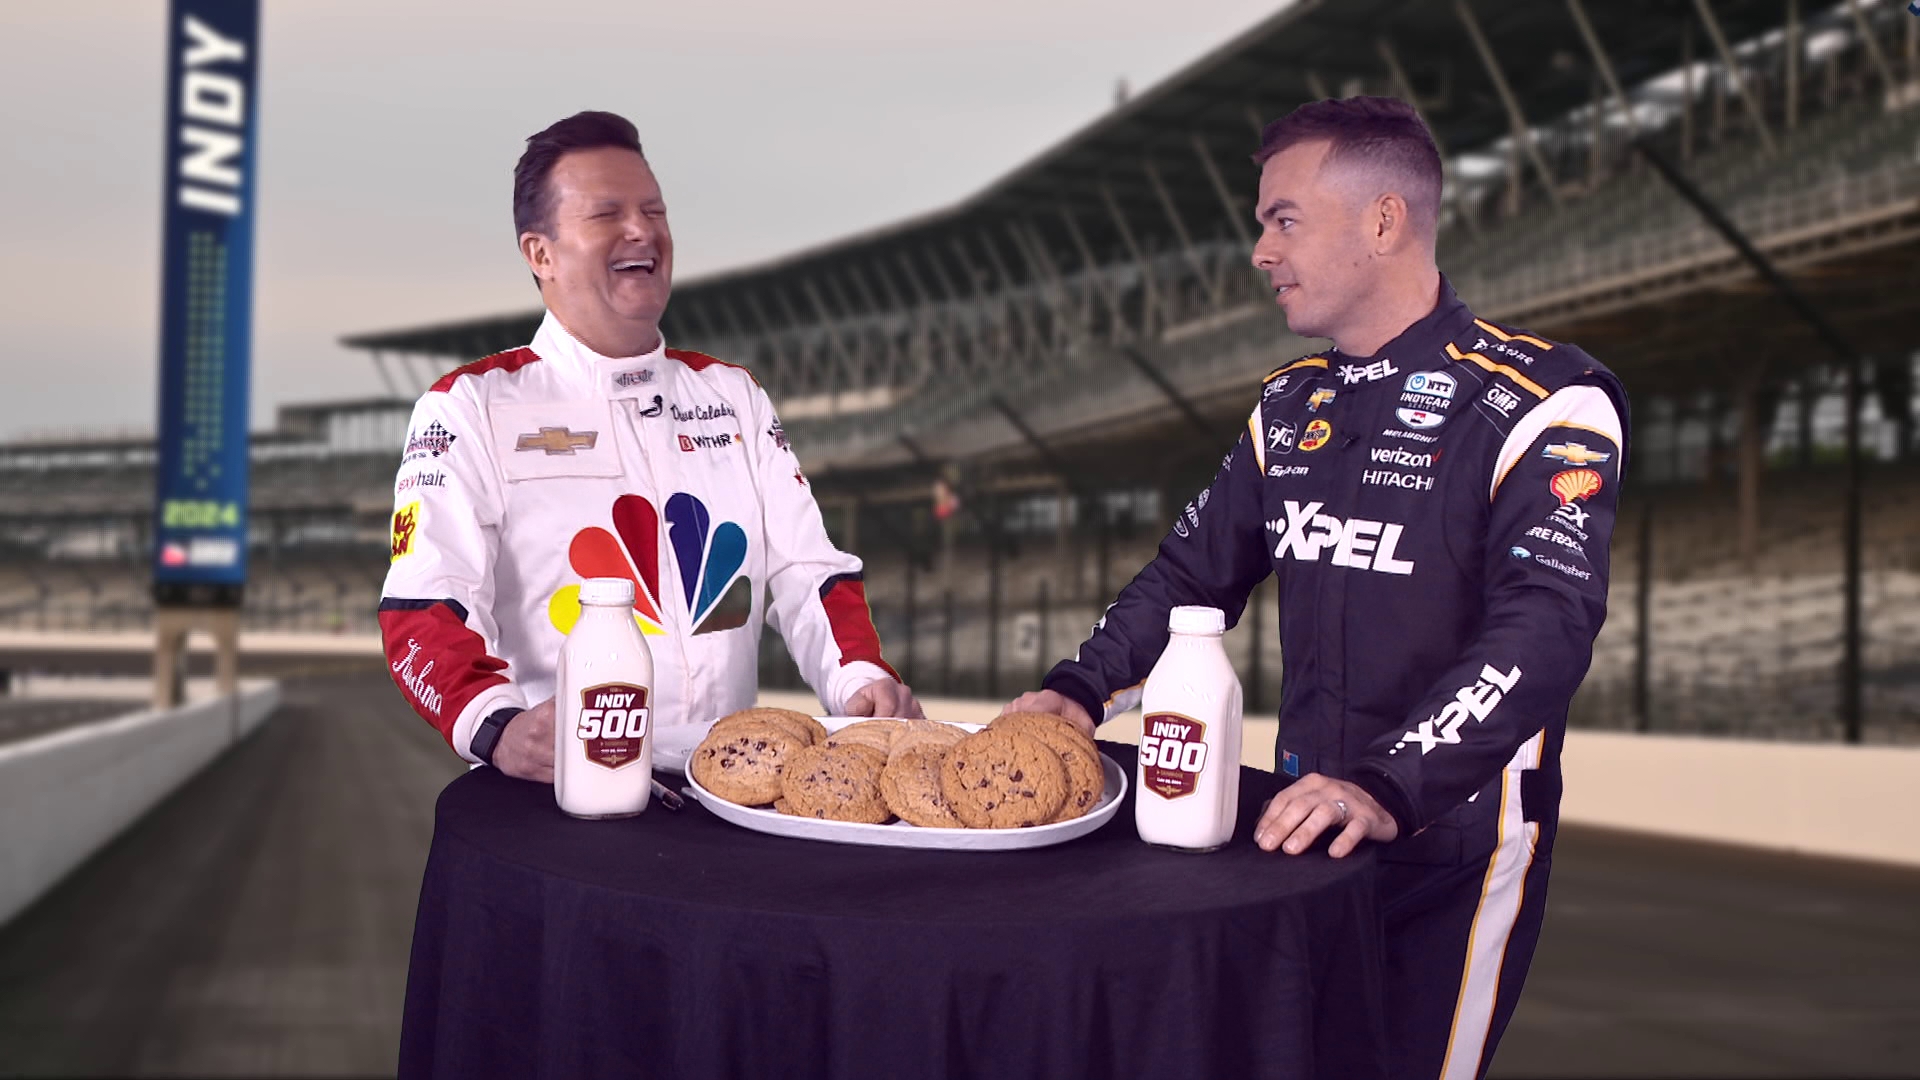 The drivers don't hold back as they talk with Dave Calabro over Milk & Cookies.